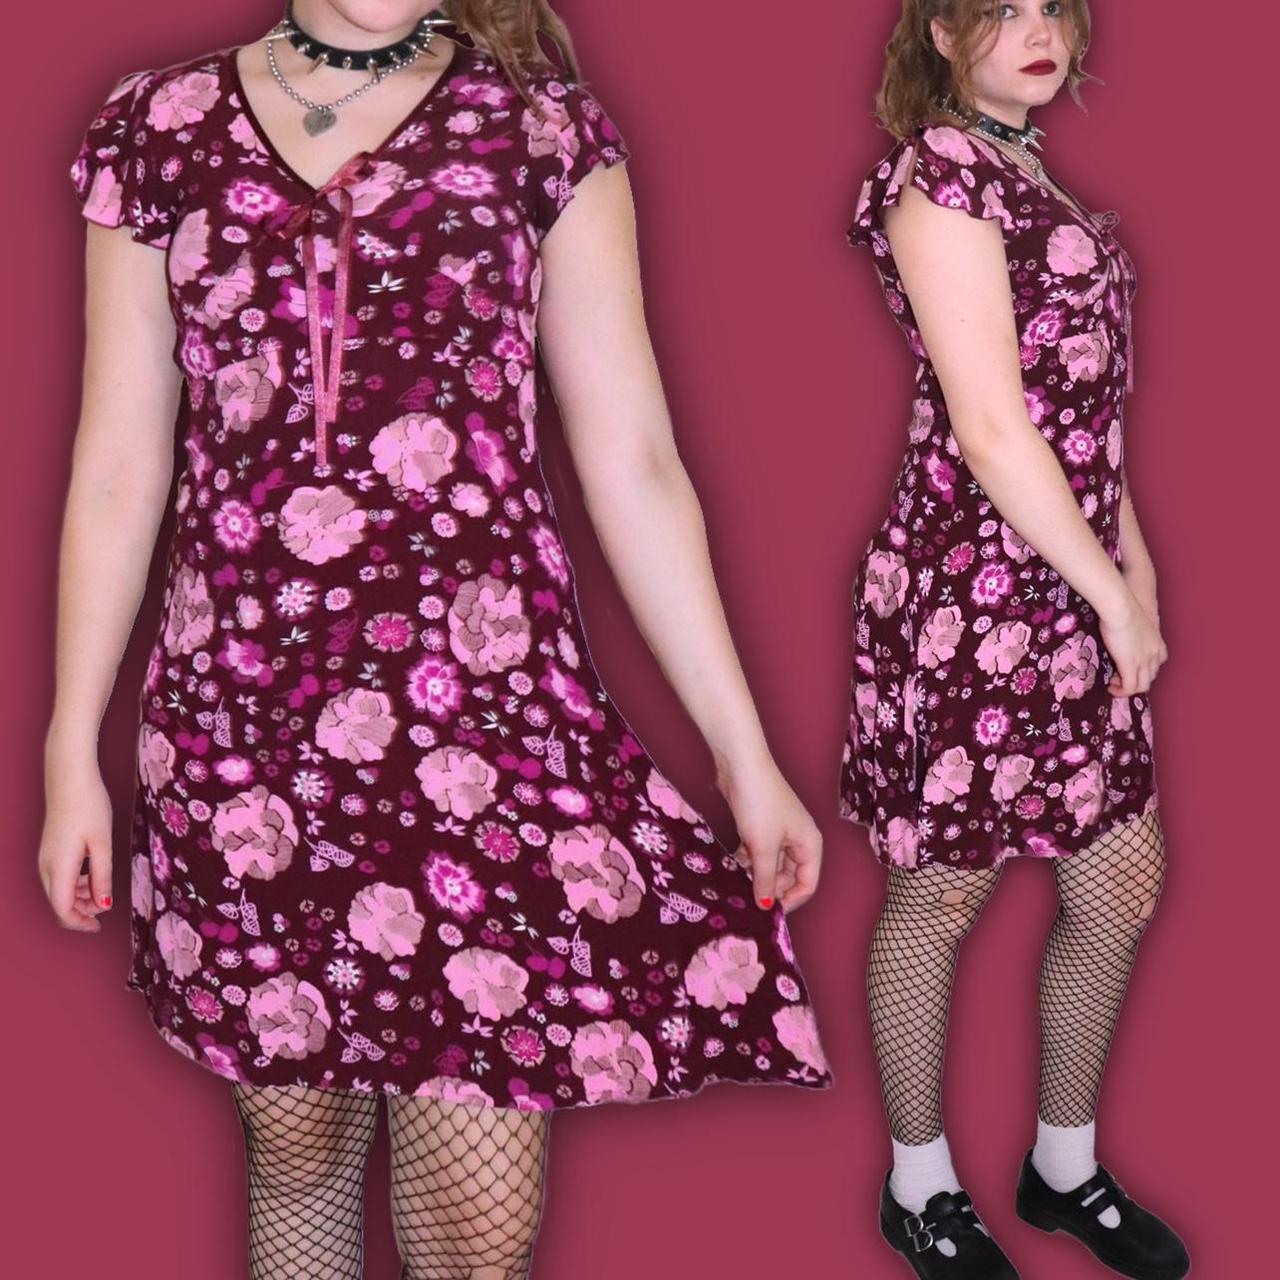 Product Image 1 - 🎀THE ROSIE DRESS🎀
✿ sweet floral